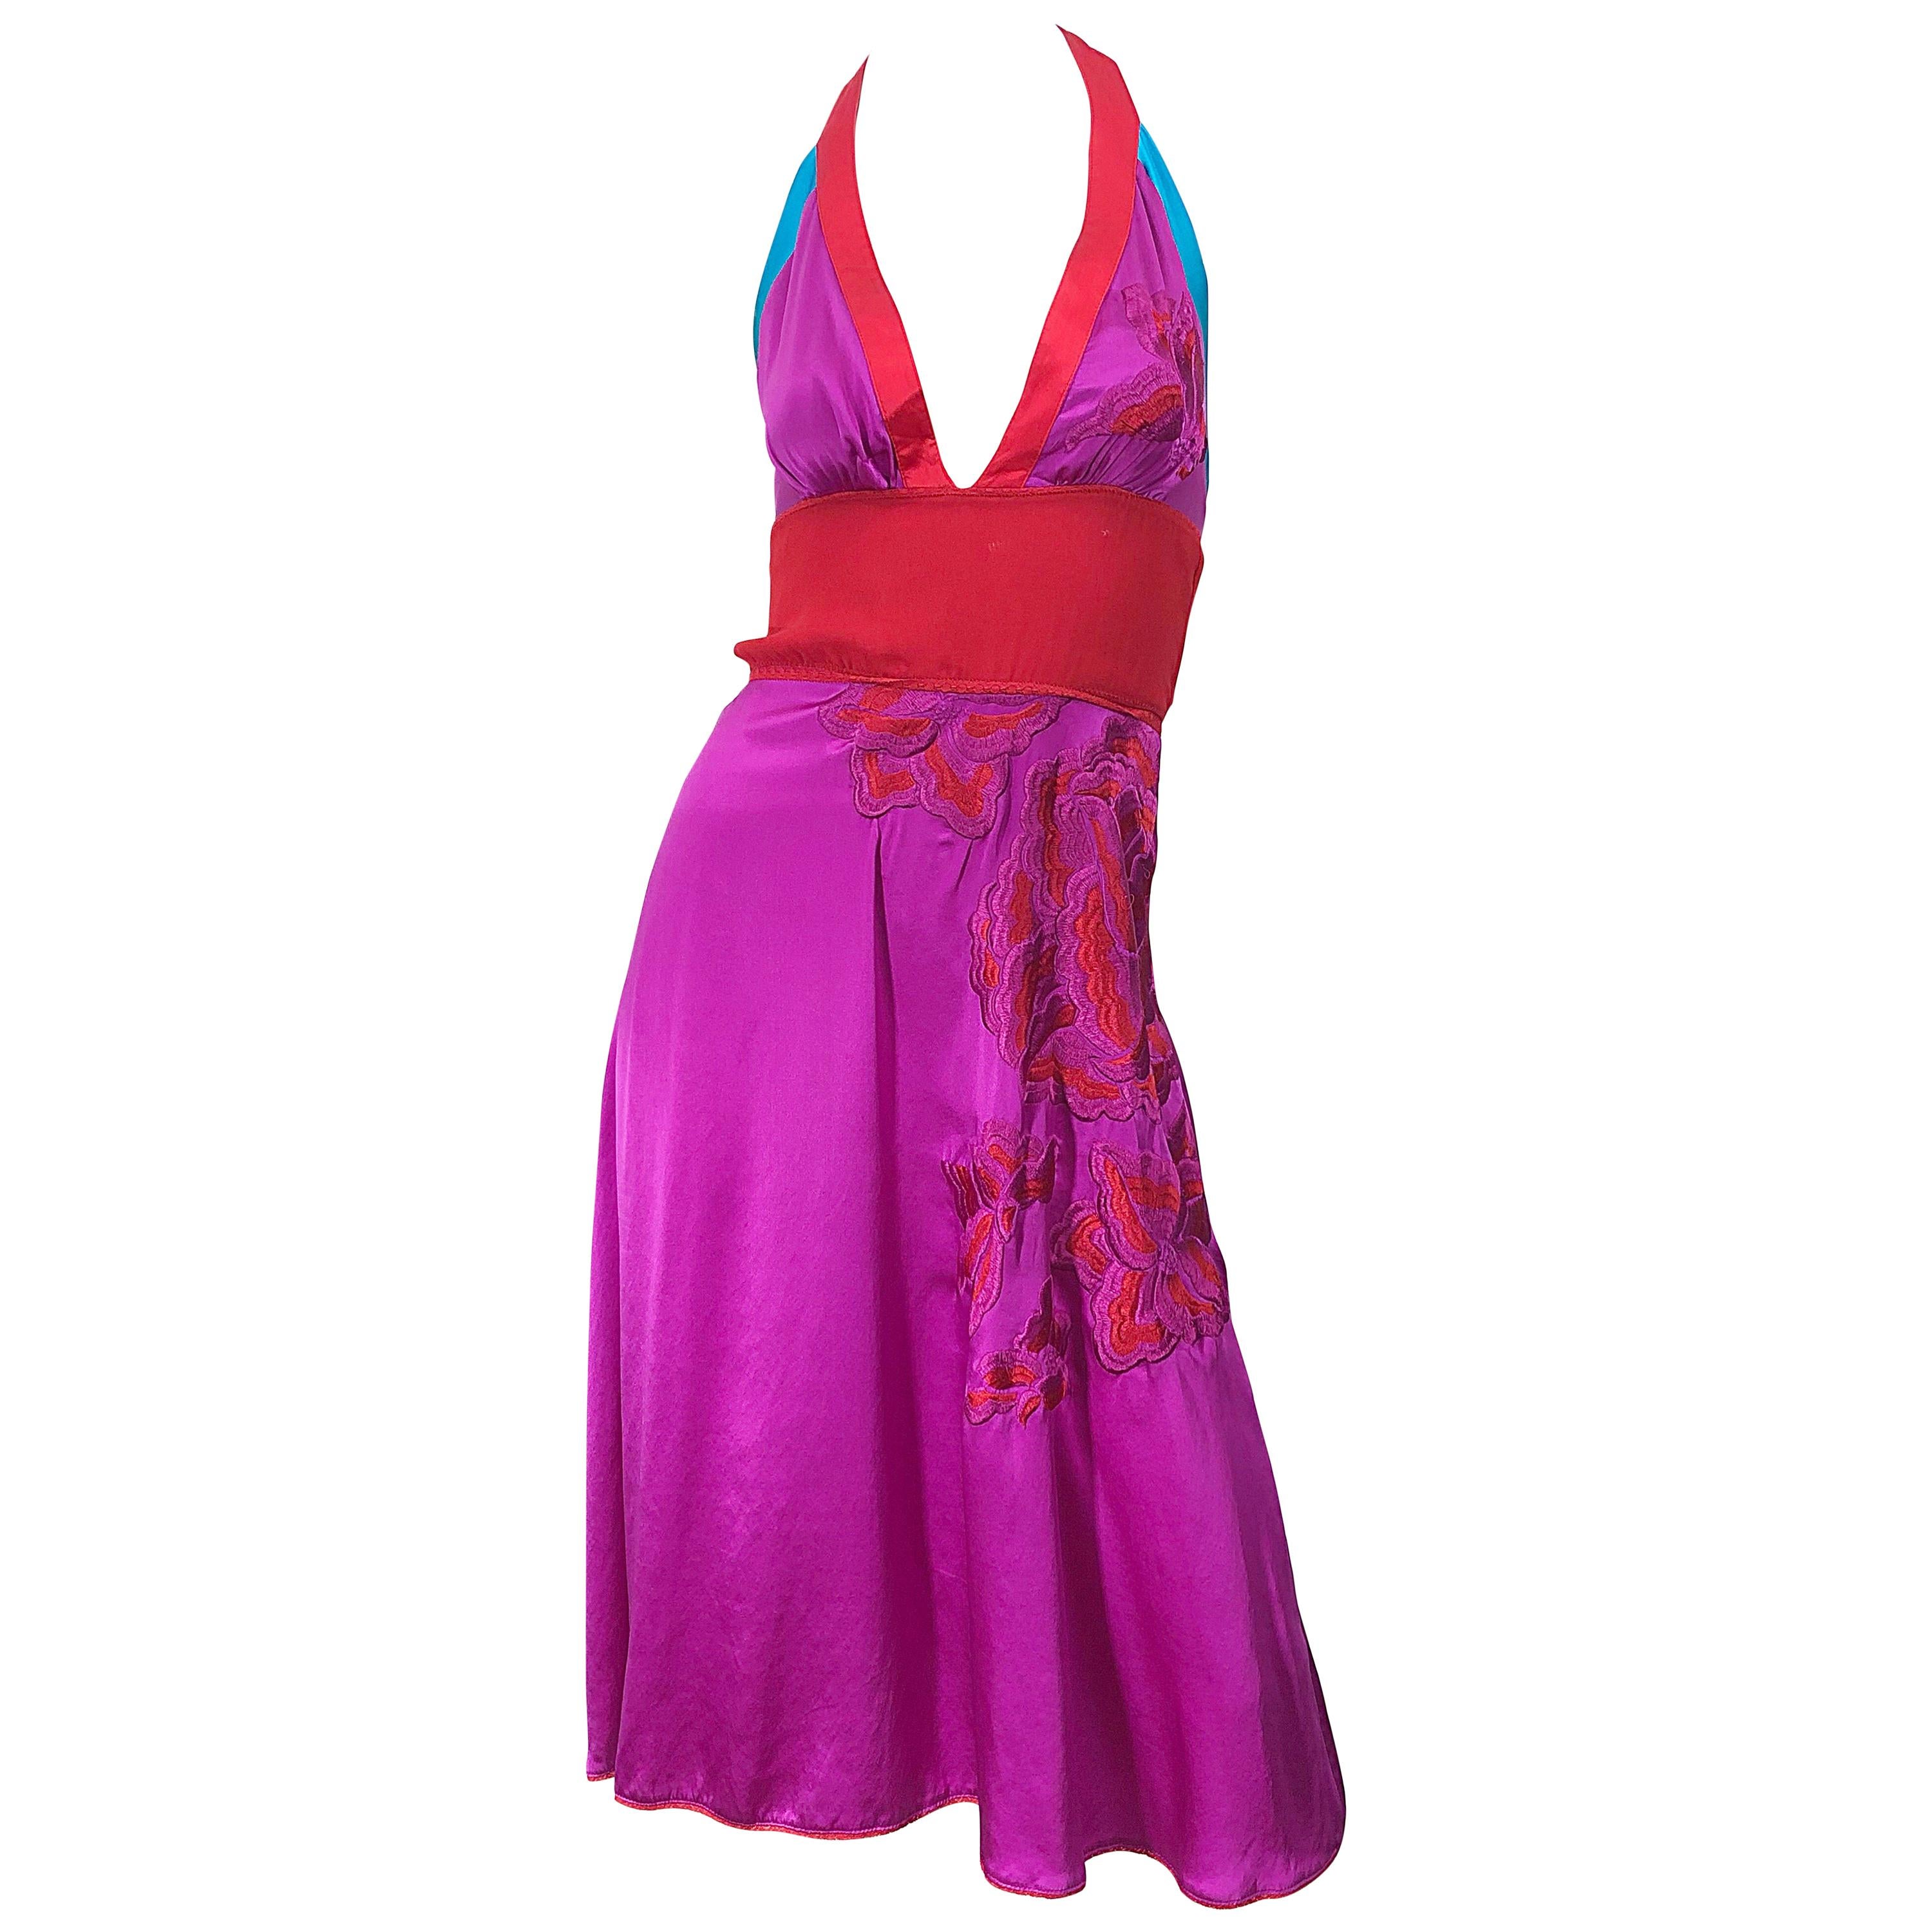 1990s Gianfranco Ferre Sexy Embroidered Hot Pink Red Blue Vintage Halter Dress